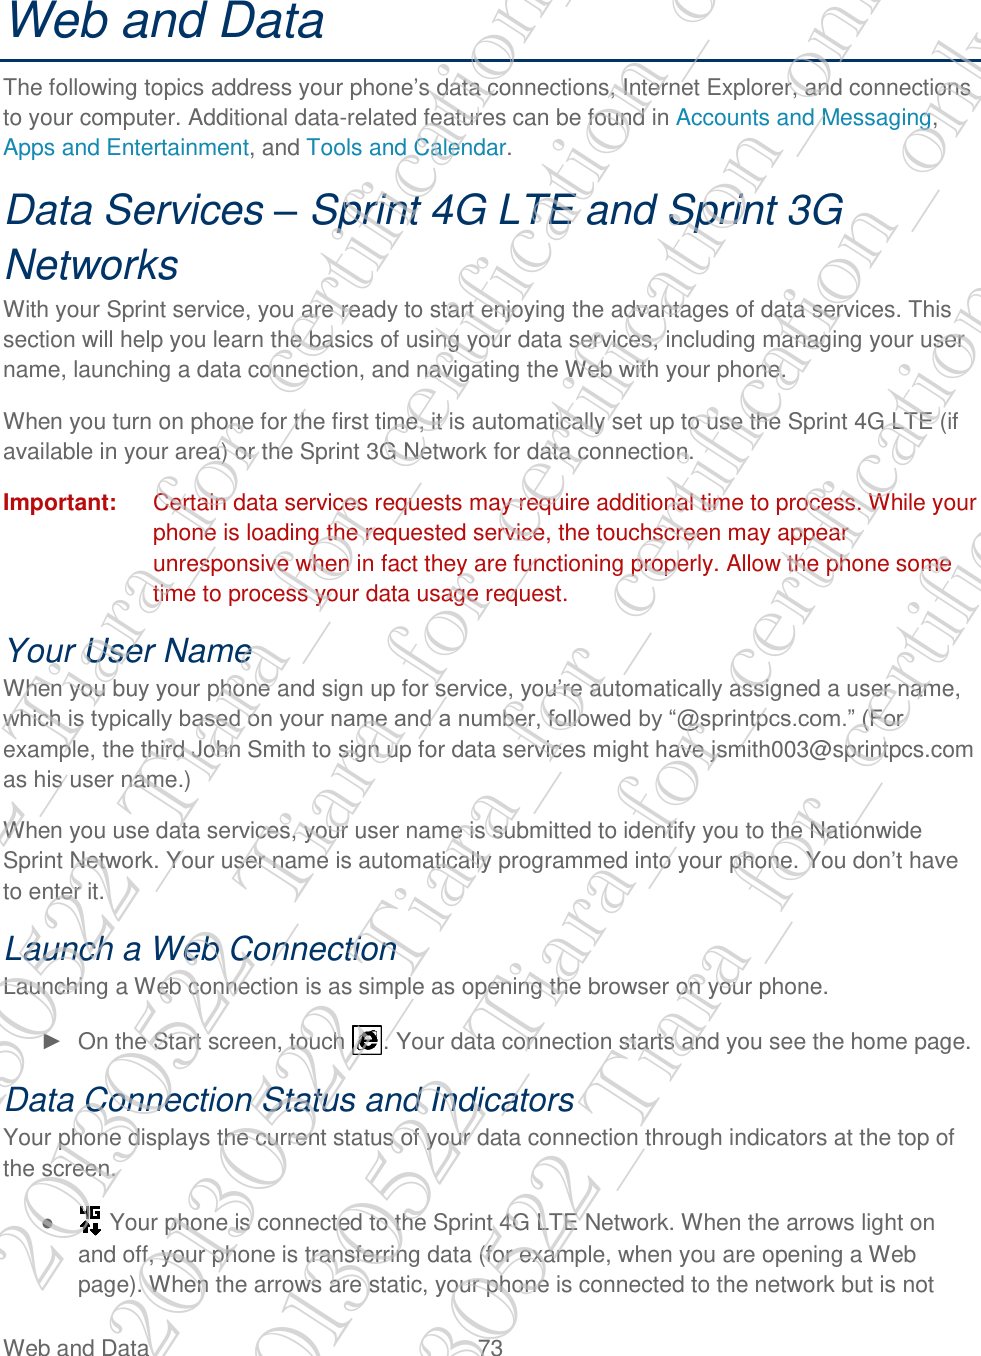  Web and Data  73   Web and Data The following topics address your phone’s data connections, Internet Explorer, and connections to your computer. Additional data-related features can be found in Accounts and Messaging, Apps and Entertainment, and Tools and Calendar. Data Services – Sprint 4G LTE and Sprint 3G Networks With your Sprint service, you are ready to start enjoying the advantages of data services. This section will help you learn the basics of using your data services, including managing your user name, launching a data connection, and navigating the Web with your phone. When you turn on phone for the first time, it is automatically set up to use the Sprint 4G LTE (if available in your area) or the Sprint 3G Network for data connection. Important:  Certain data services requests may require additional time to process. While your phone is loading the requested service, the touchscreen may appear unresponsive when in fact they are functioning properly. Allow the phone some time to process your data usage request. Your User Name When you buy your phone and sign up for service, you’re automatically assigned a user name, which is typically based on your name and a number, followed by ―@sprintpcs.com.‖ (For example, the third John Smith to sign up for data services might have jsmith003@sprintpcs.com as his user name.) When you use data services, your user name is submitted to identify you to the Nationwide Sprint Network. Your user name is automatically programmed into your phone. You don’t have to enter it. Launch a Web Connection Launching a Web connection is as simple as opening the browser on your phone. ►  On the Start screen, touch  . Your data connection starts and you see the home page. Data Connection Status and Indicators Your phone displays the current status of your data connection through indicators at the top of the screen. ●   Your phone is connected to the Sprint 4G LTE Network. When the arrows light on and off, your phone is transferring data (for example, when you are opening a Web page). When the arrows are static, your phone is connected to the network but is not 20130522_Tiara_for_certification_only 20130522_Tiara_for_certification_only 20130522_Tiara_for_certification_only 20130522_Tiara_for_certification_only 20130522_Tiara_for_certification_only 20130522_Tiara_for_certification_only